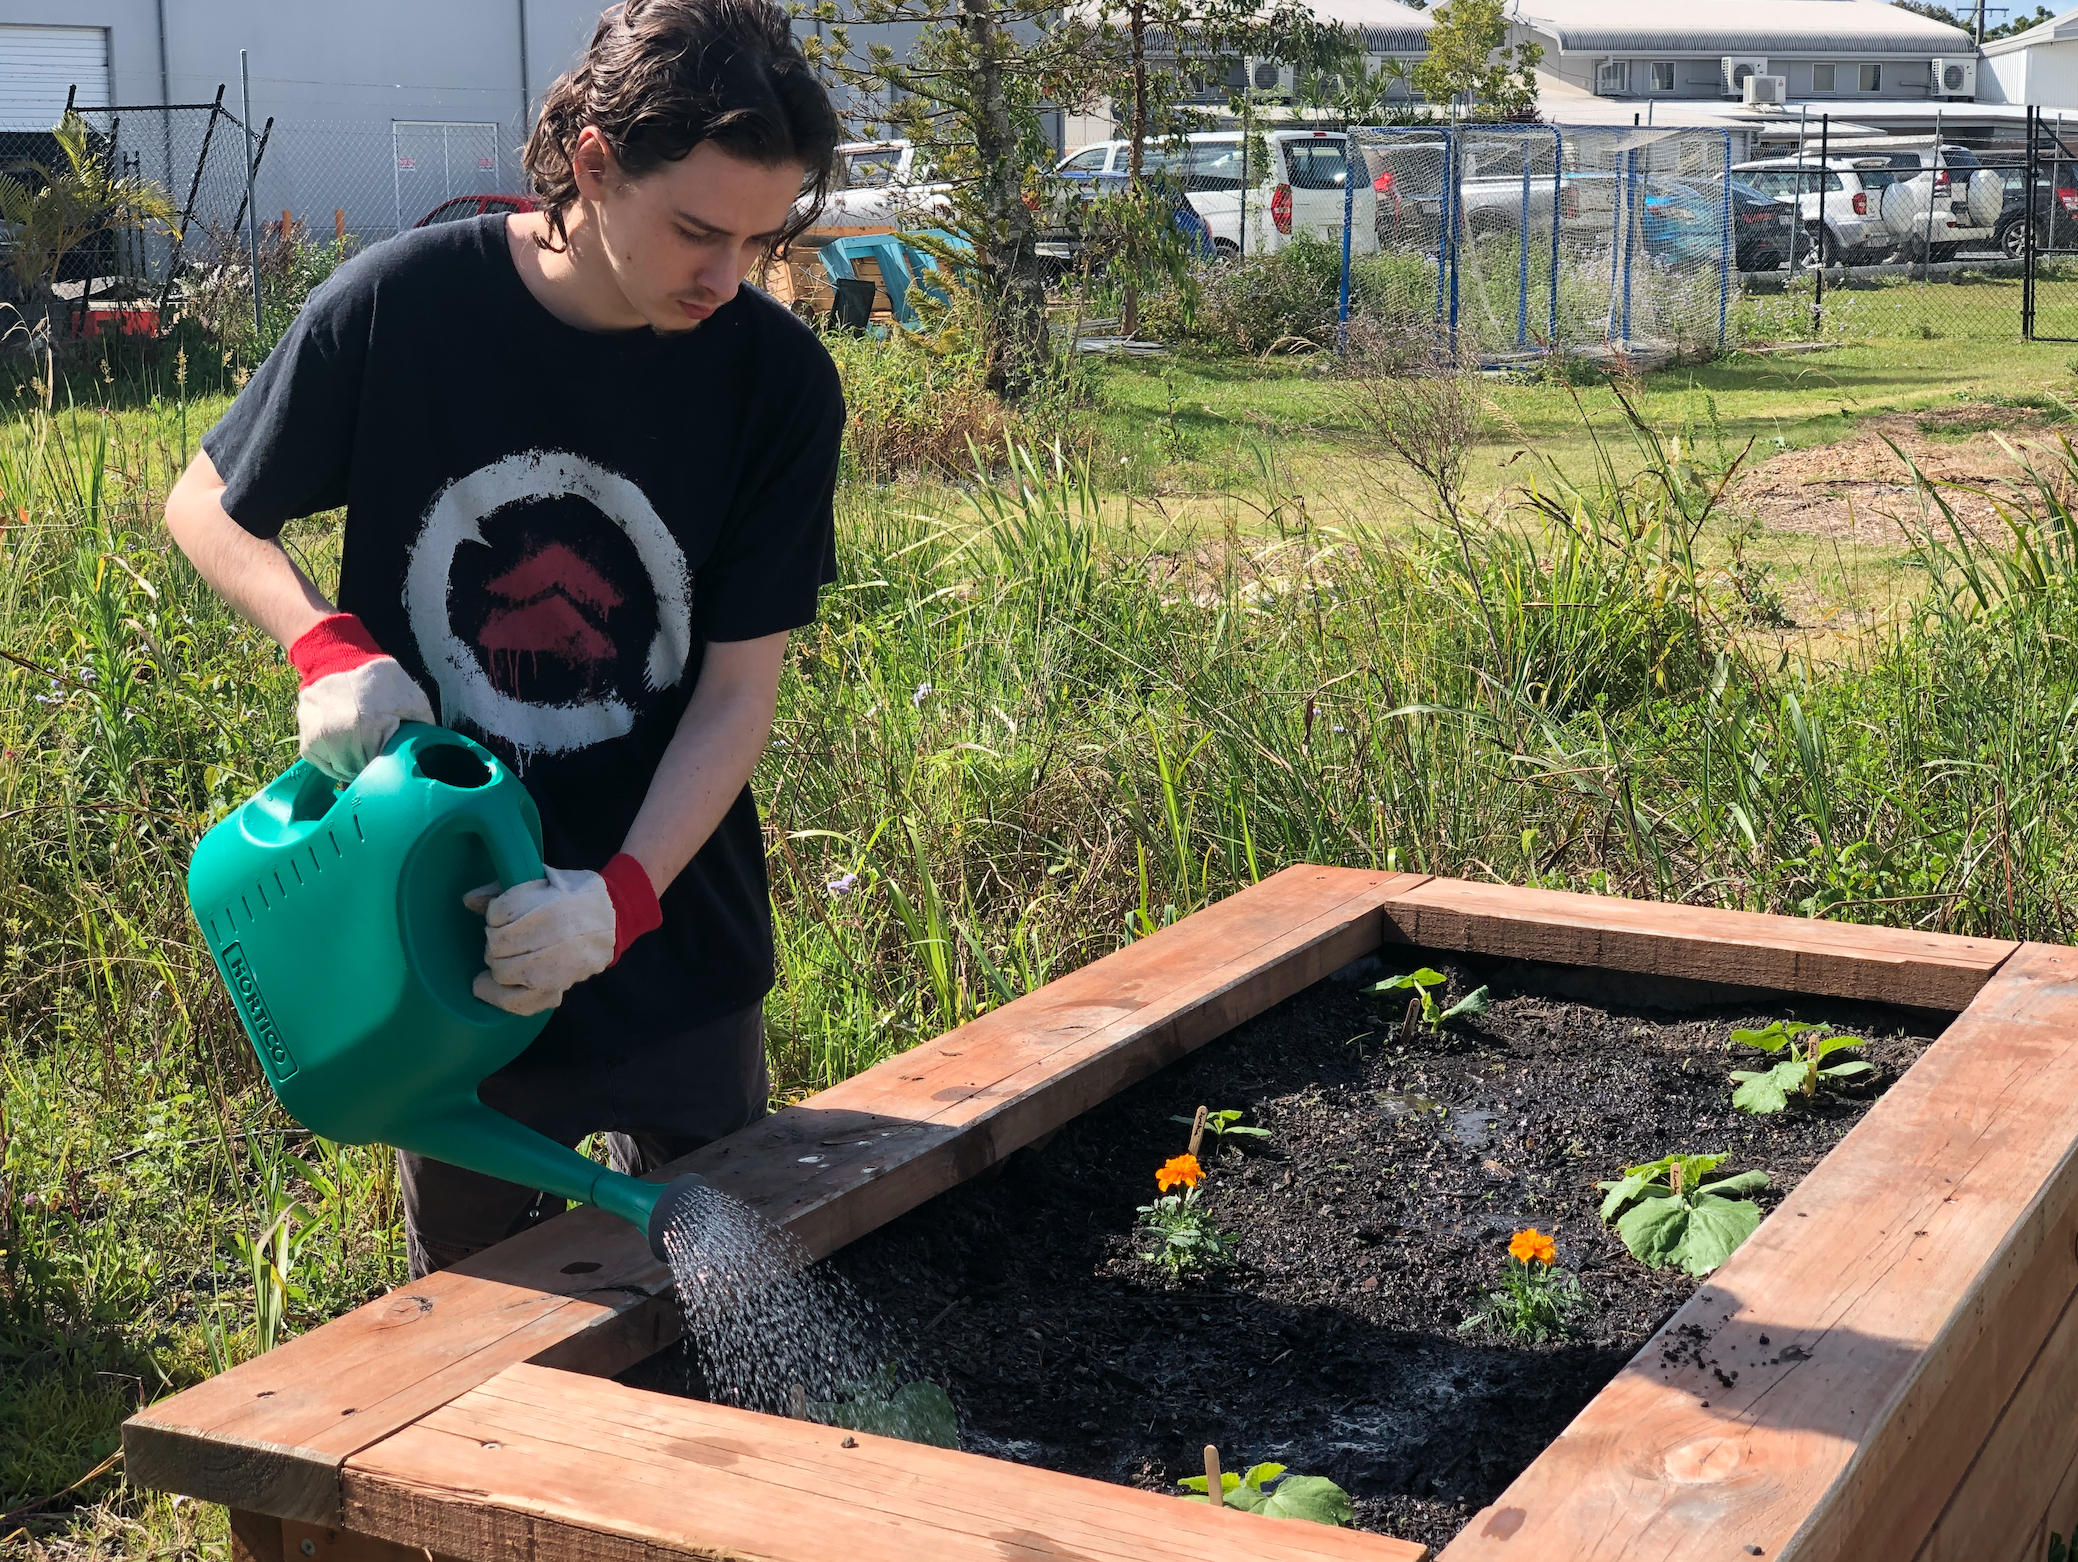 Community Gardening as part of the vocational school program with nature freedom